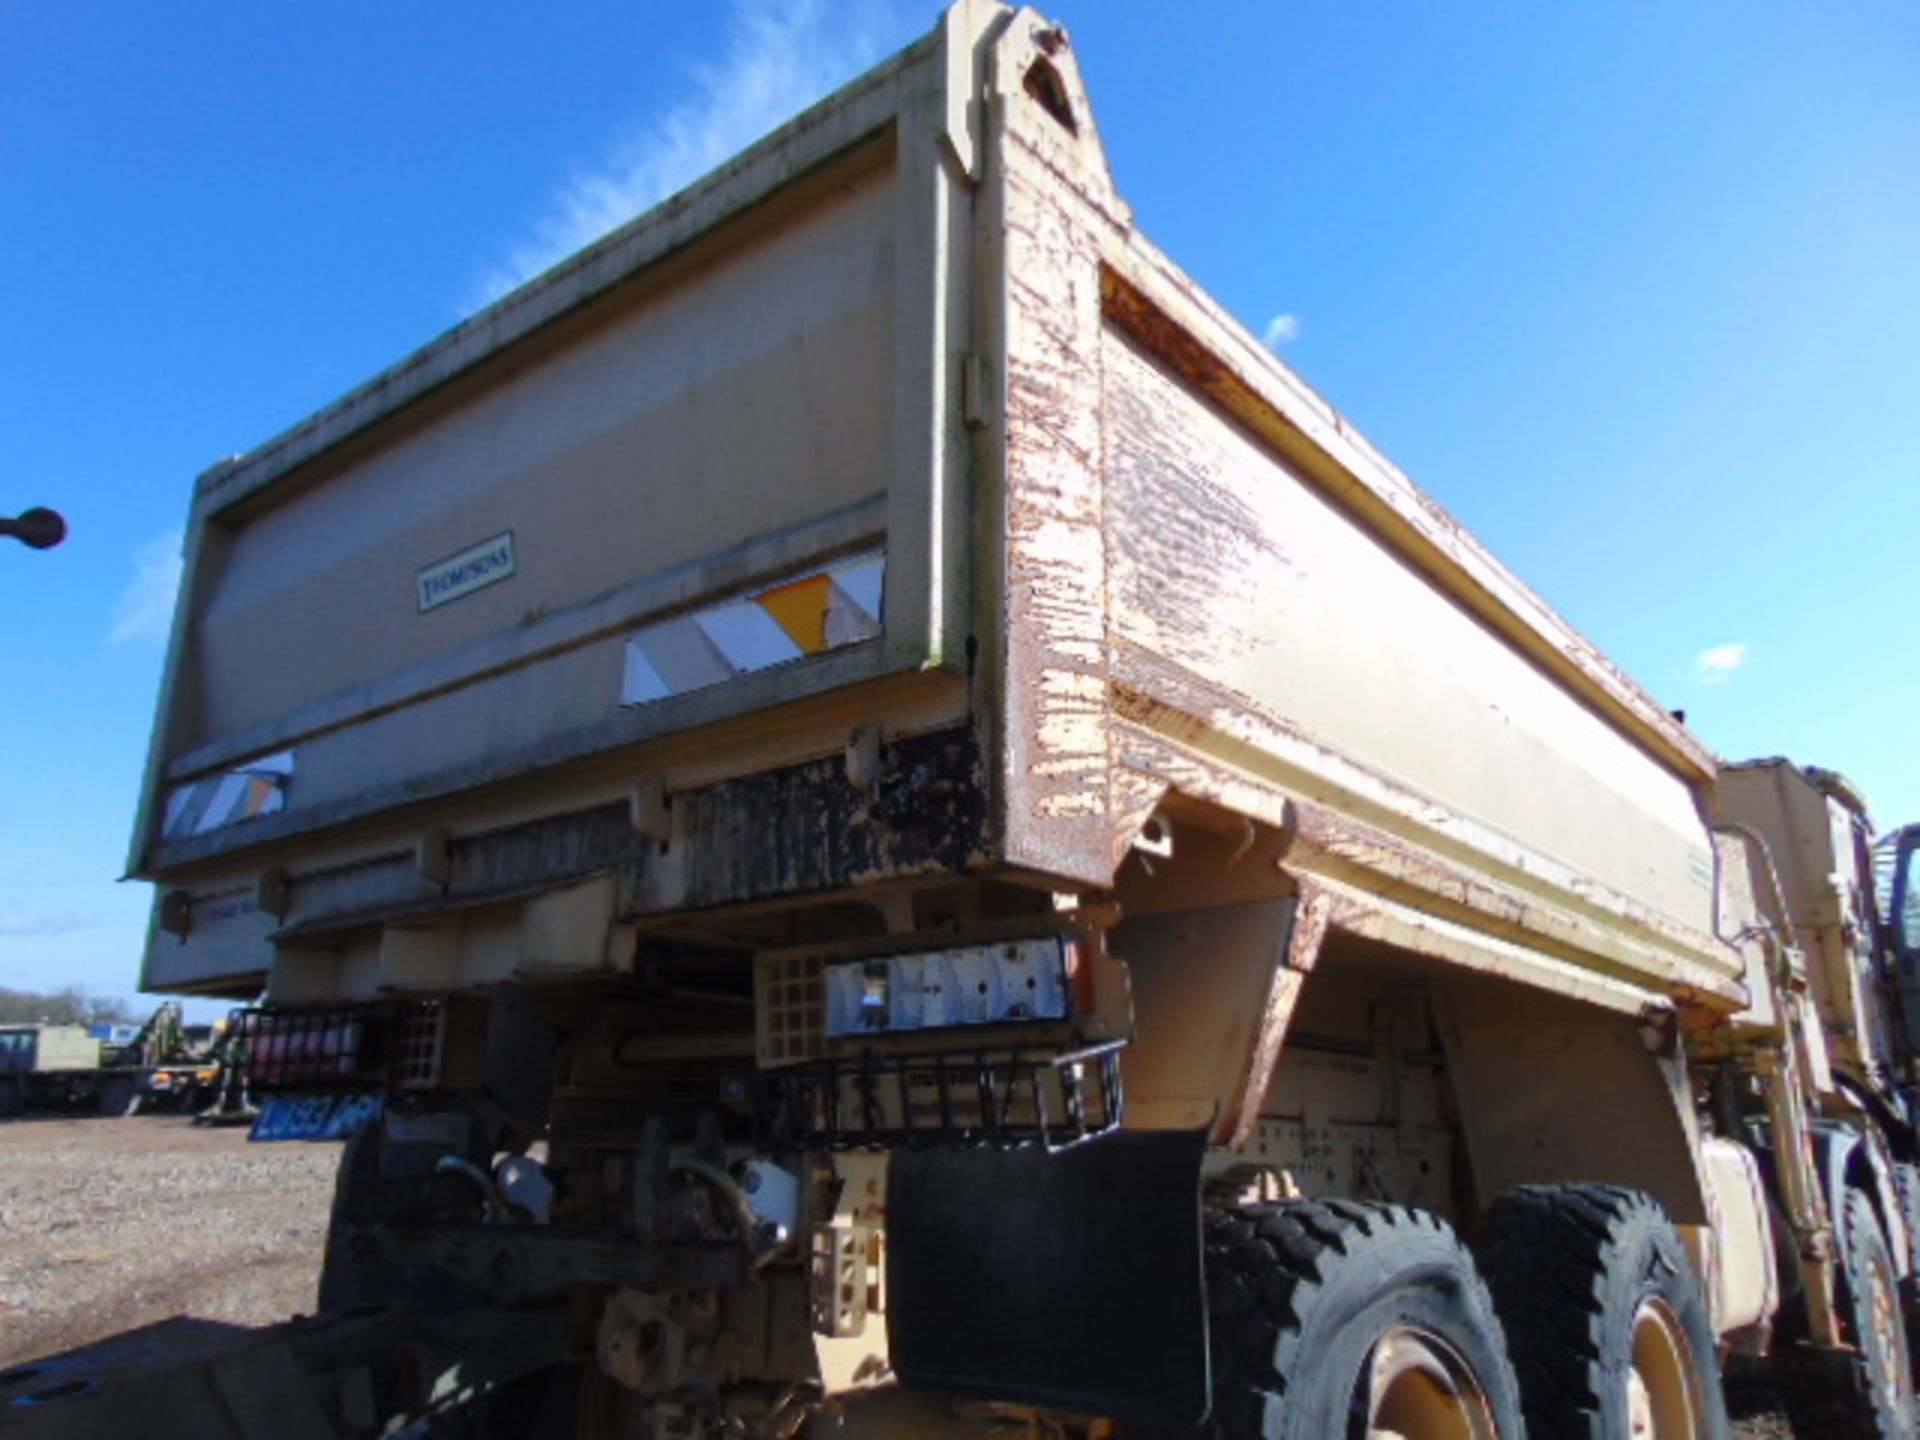 Damage Repairable LHD Iveco Trakker 8x8 Self Loading Dump Truck (Protected) - Image 14 of 15